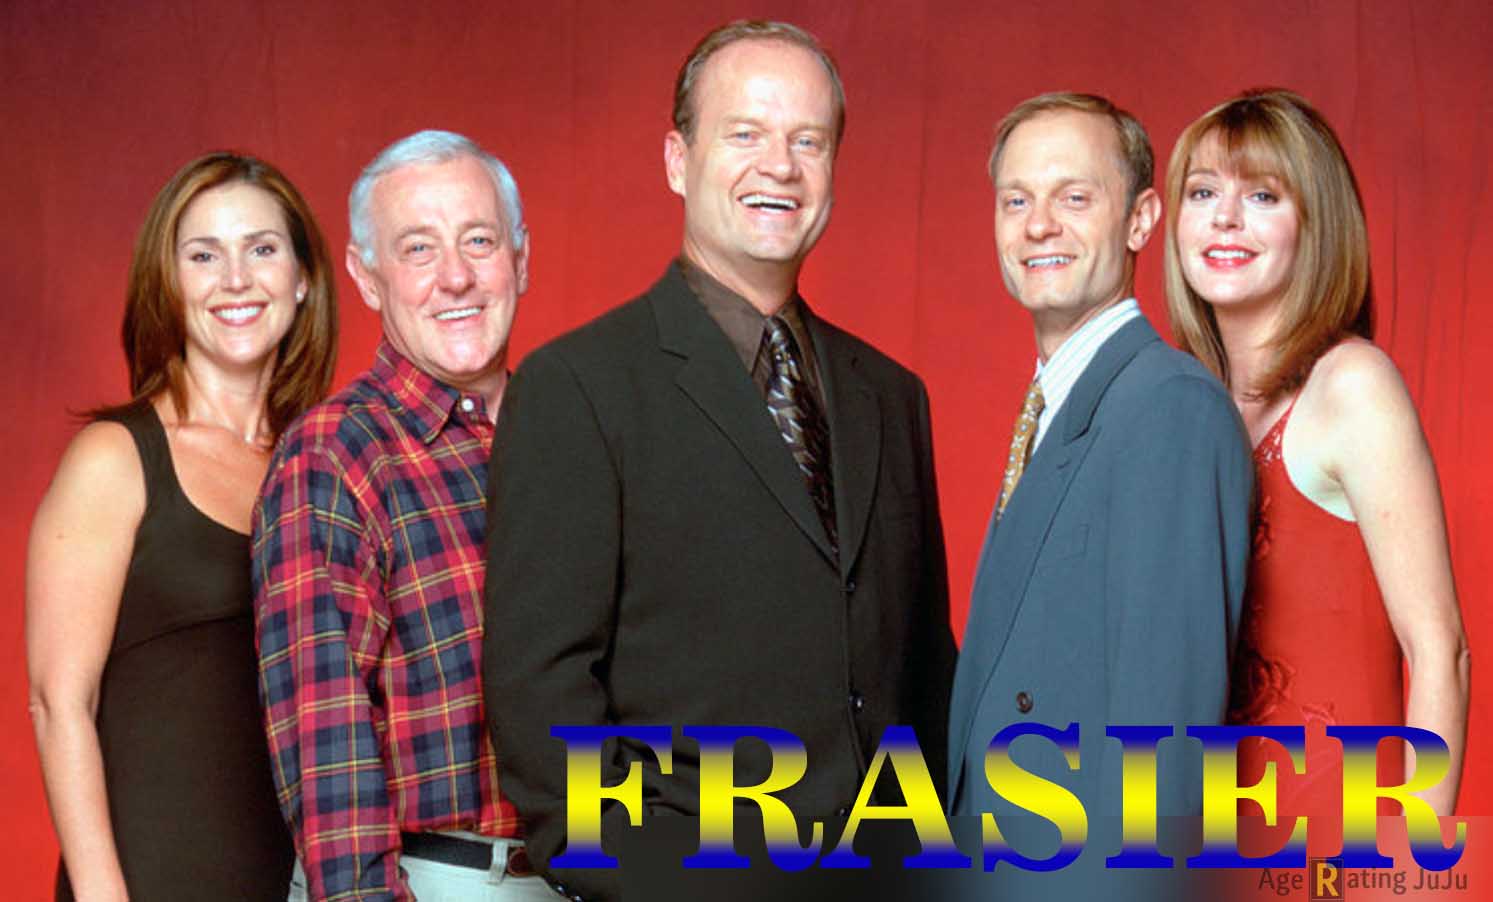 Frasier Age Rating 2018 - TV Show Netflix Poster Images and Wallpapers